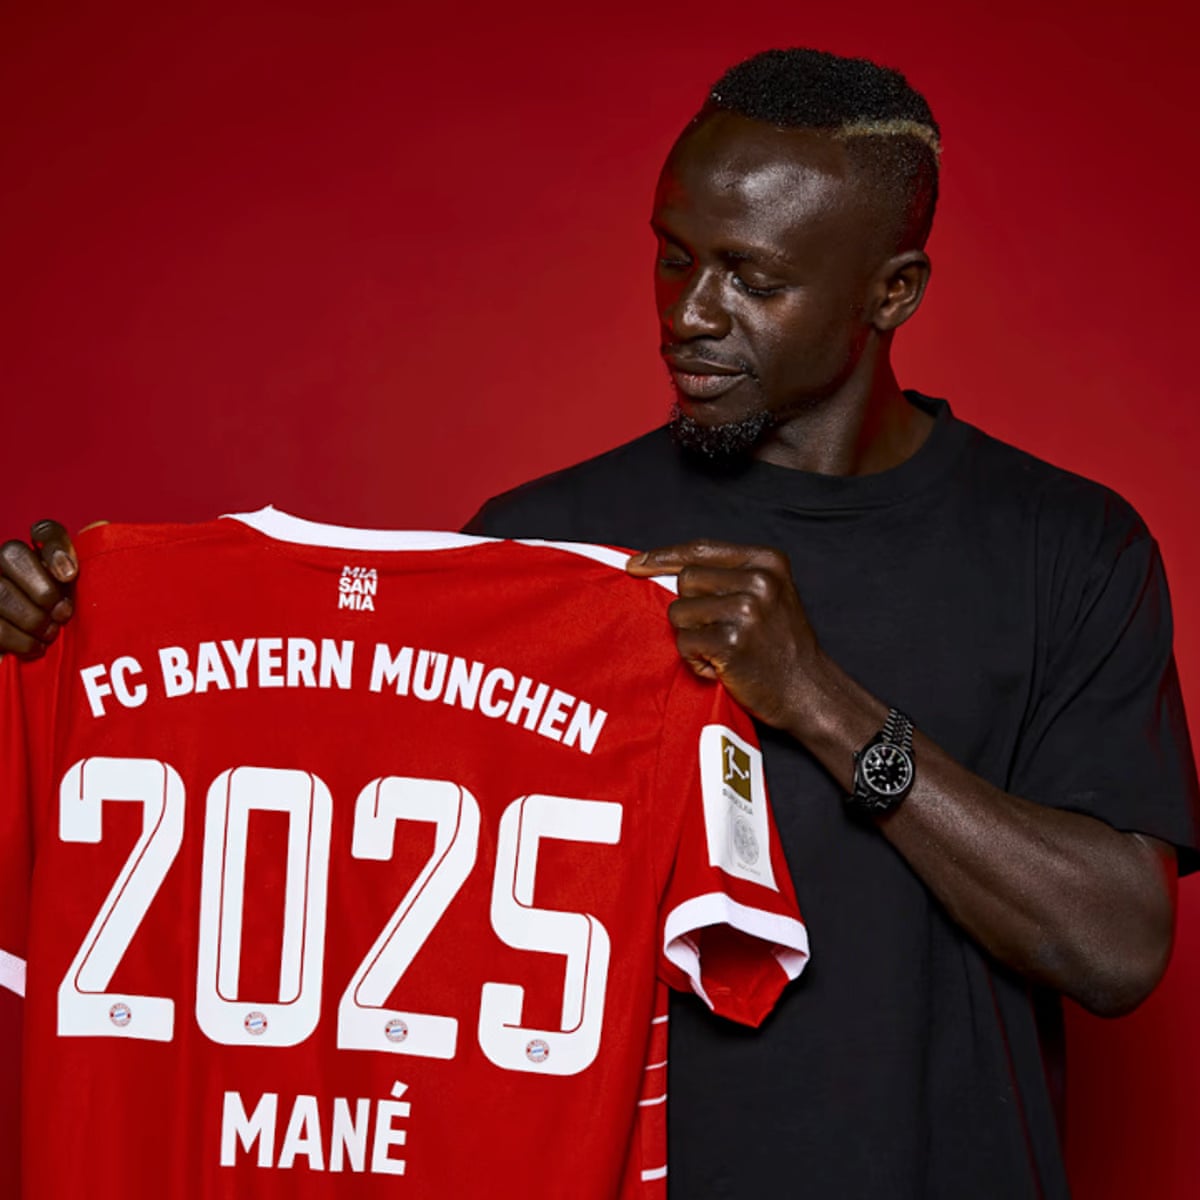 One of Liverpool's greatest': Mané hailed by Klopp after Bayern move |  Transfer window | The Guardian